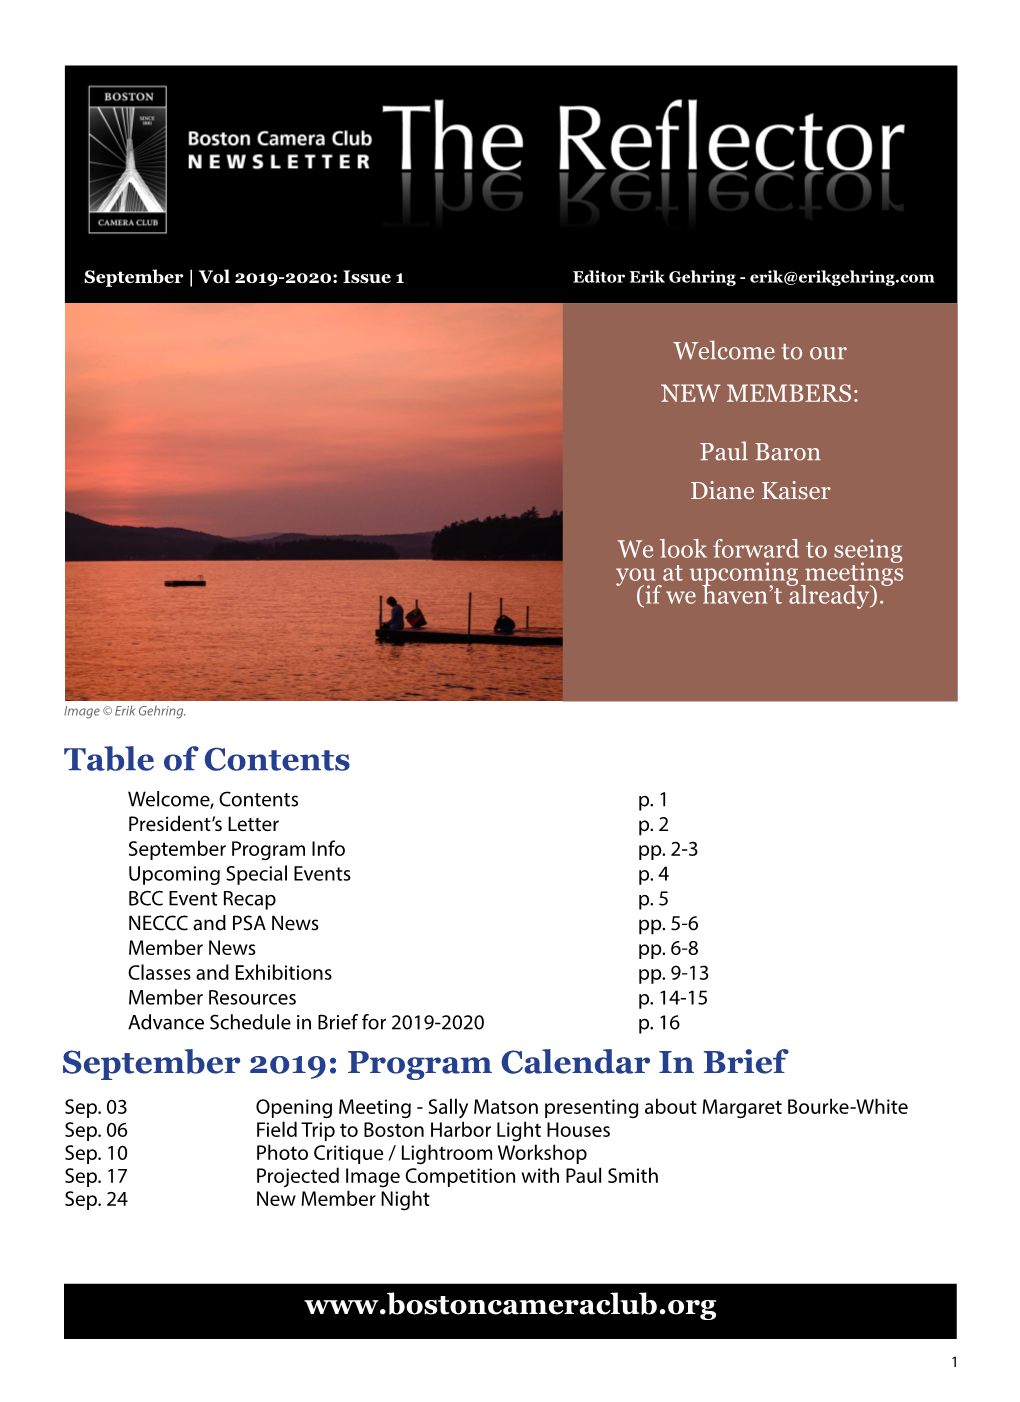 Table of Contents September 2019: Program Calendar in Brief